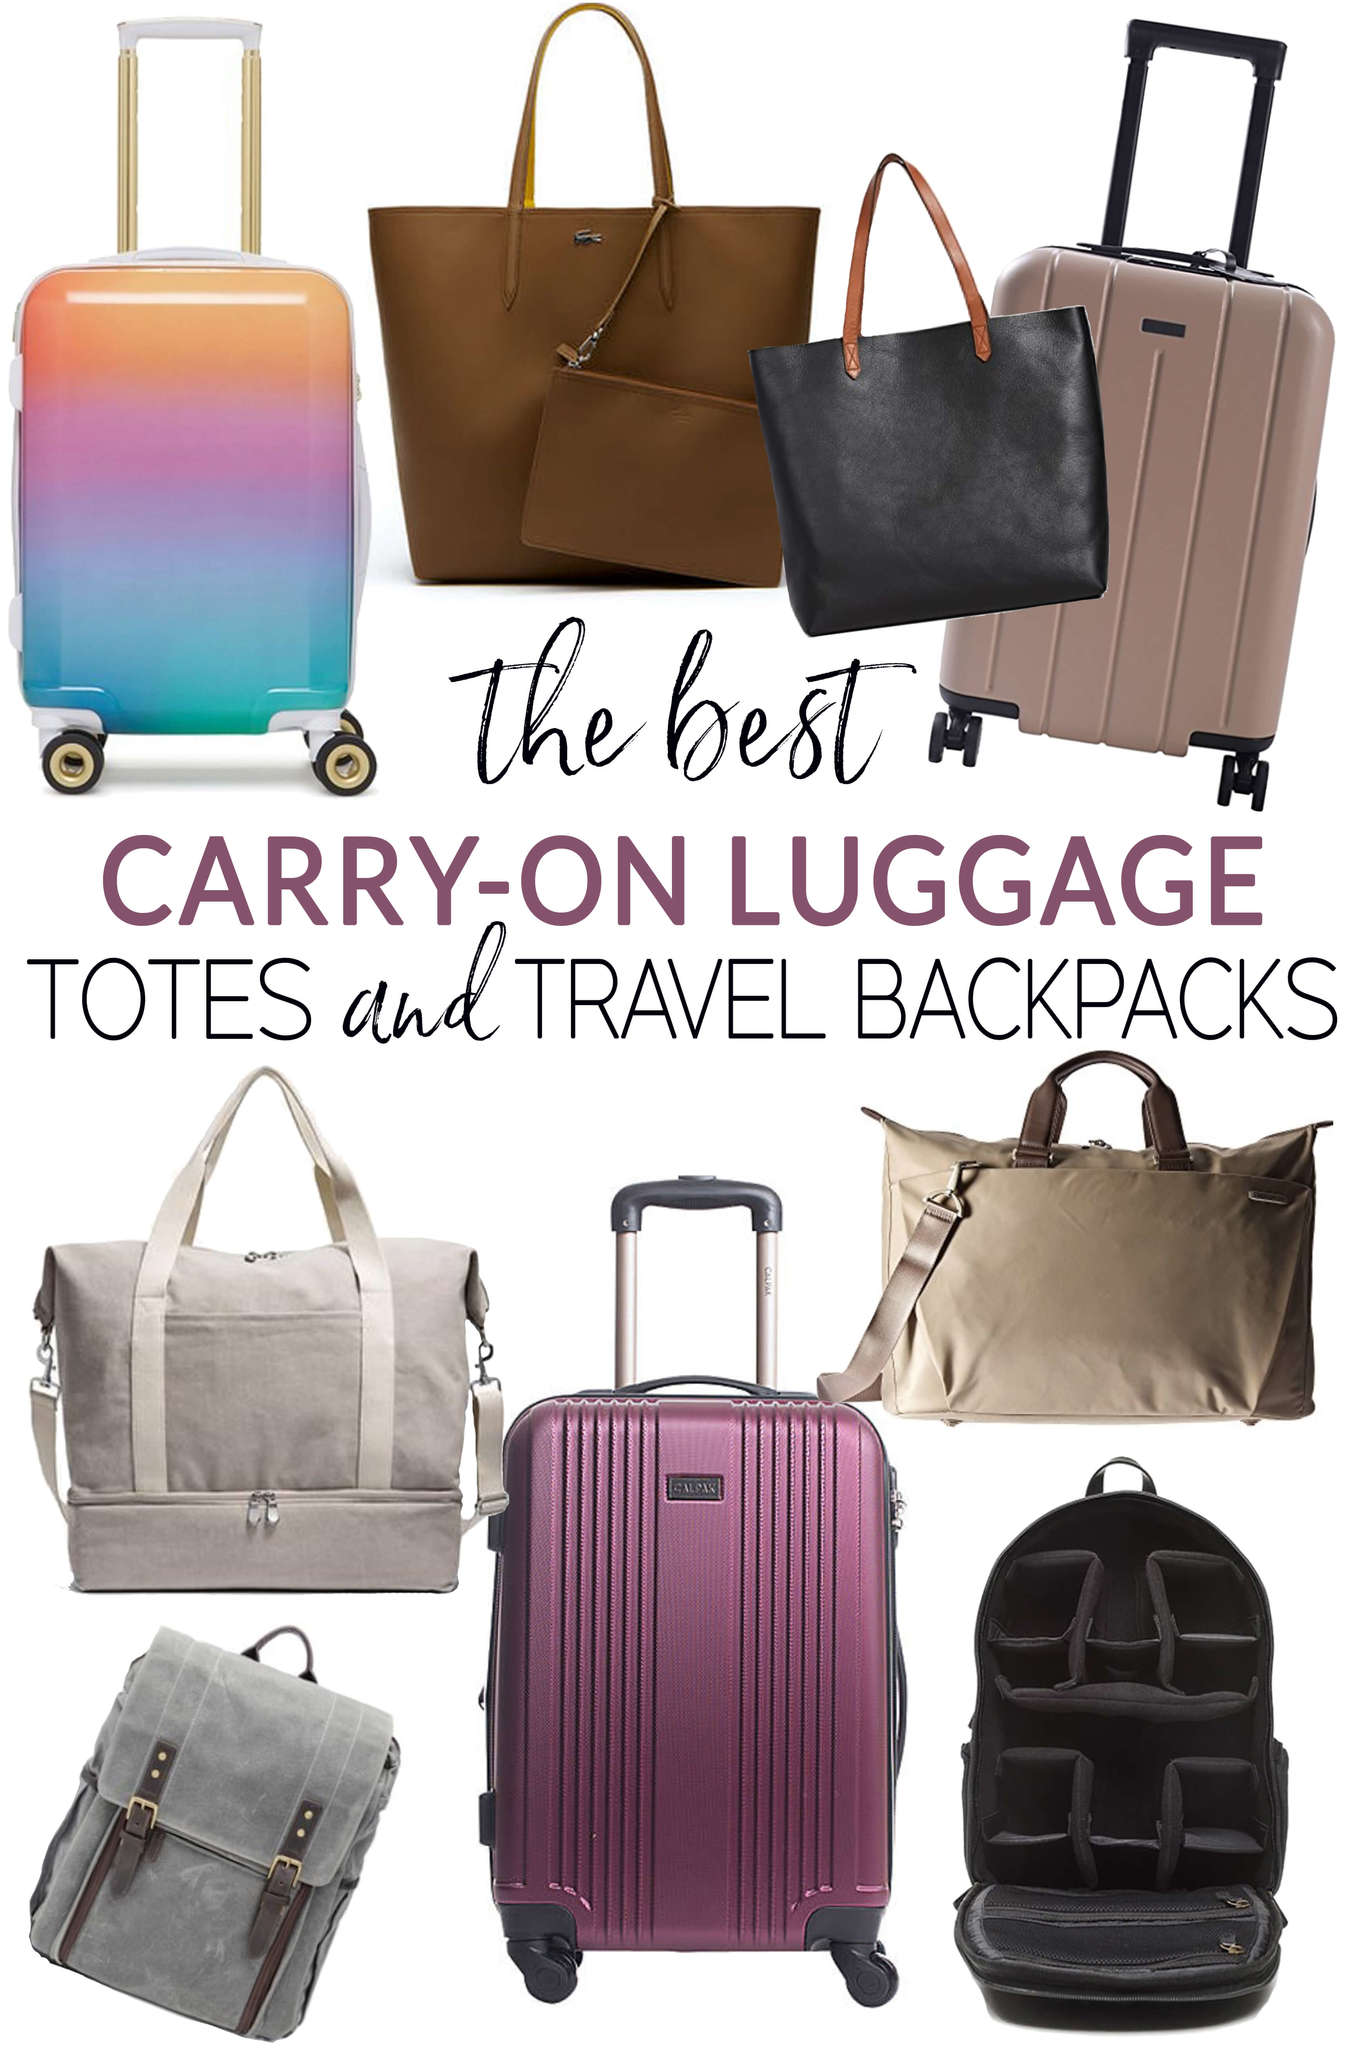 The Best Carry-On Luggage, Totes and Travel Backpacks • The Blonde Abroad